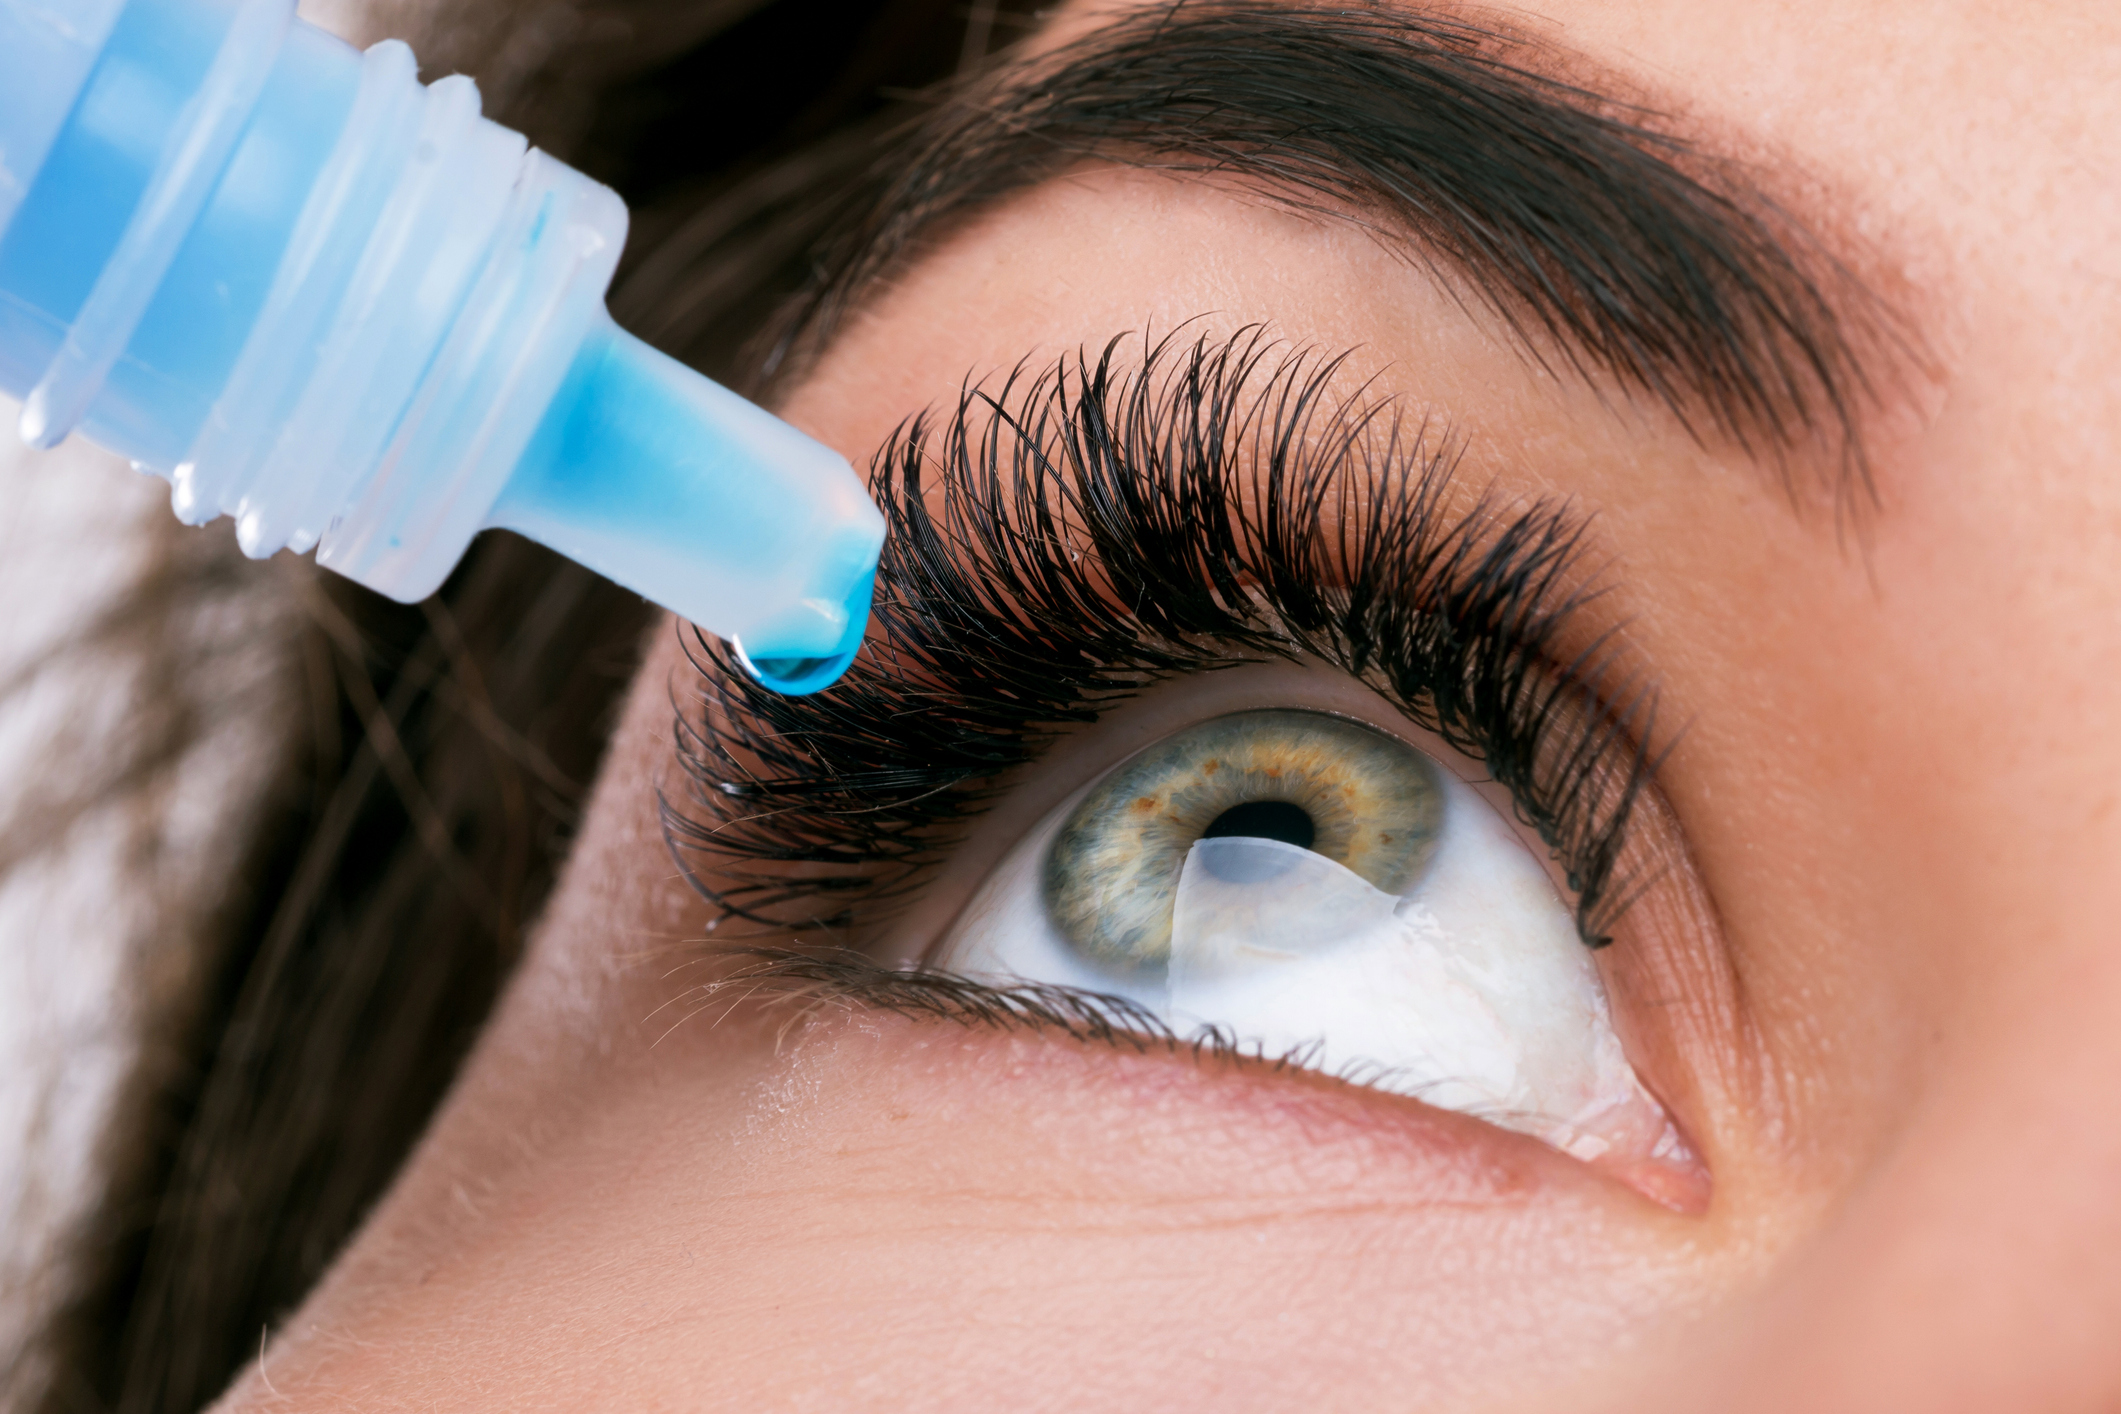 CDC Warns That a Brand of Eyedrops May Be Linked to Drug-Resistant Bacterial Infections